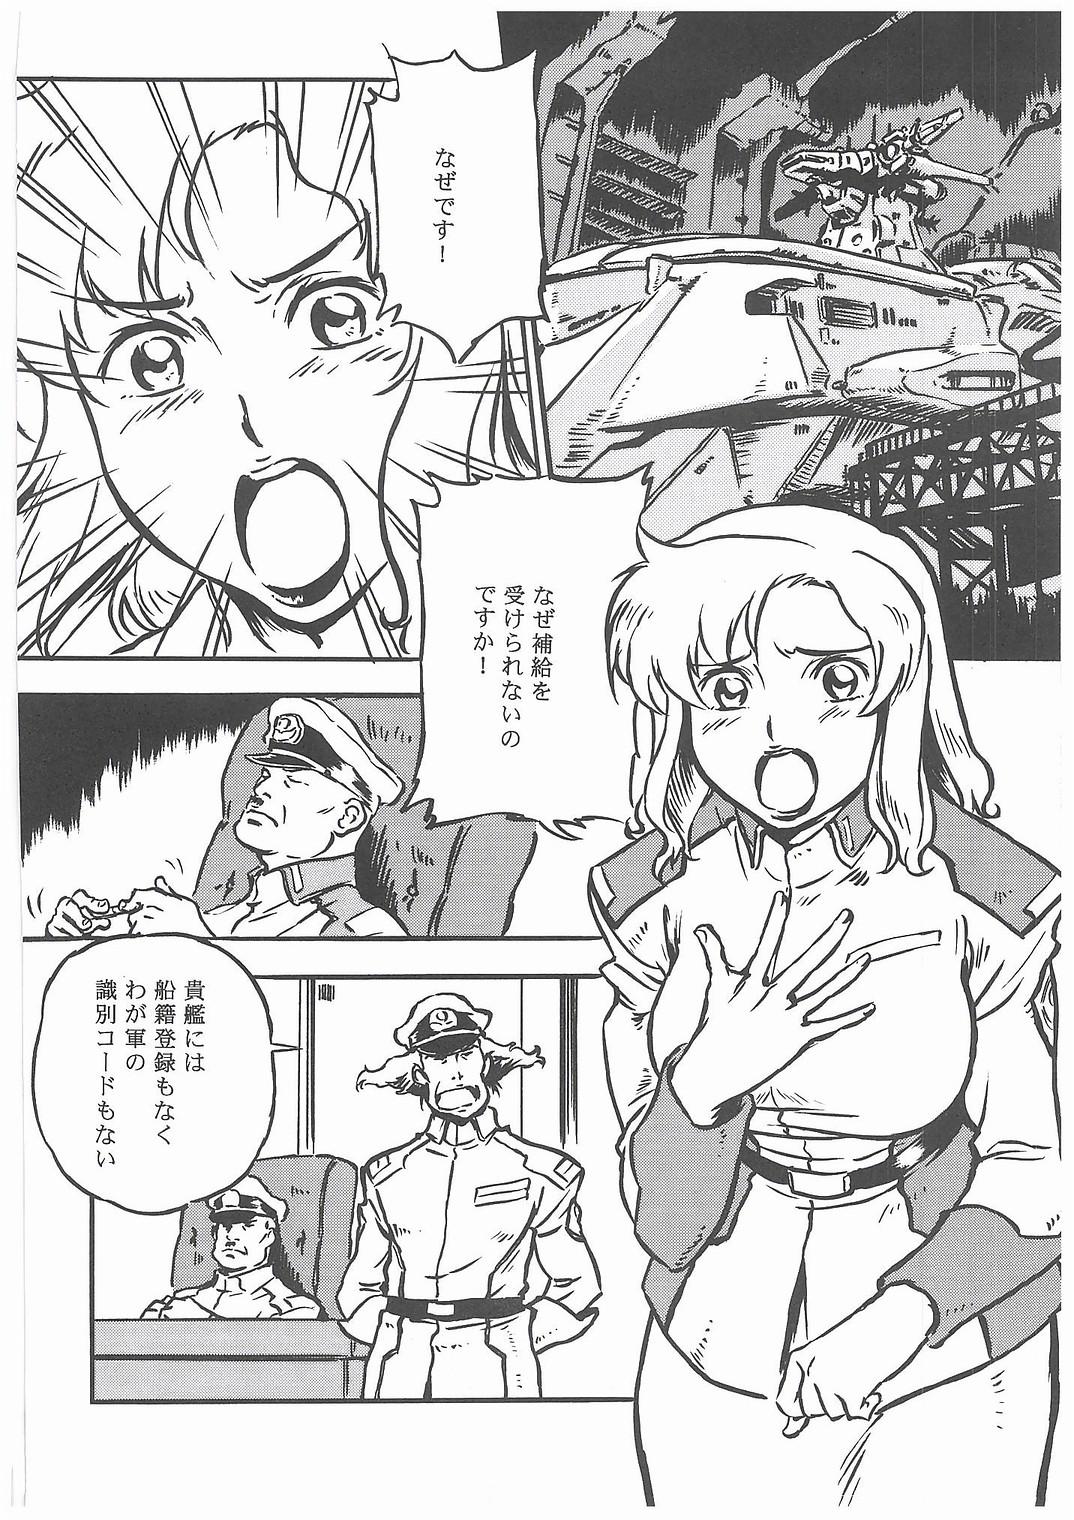 Cumload G+ - Gundam seed Home - Page 5